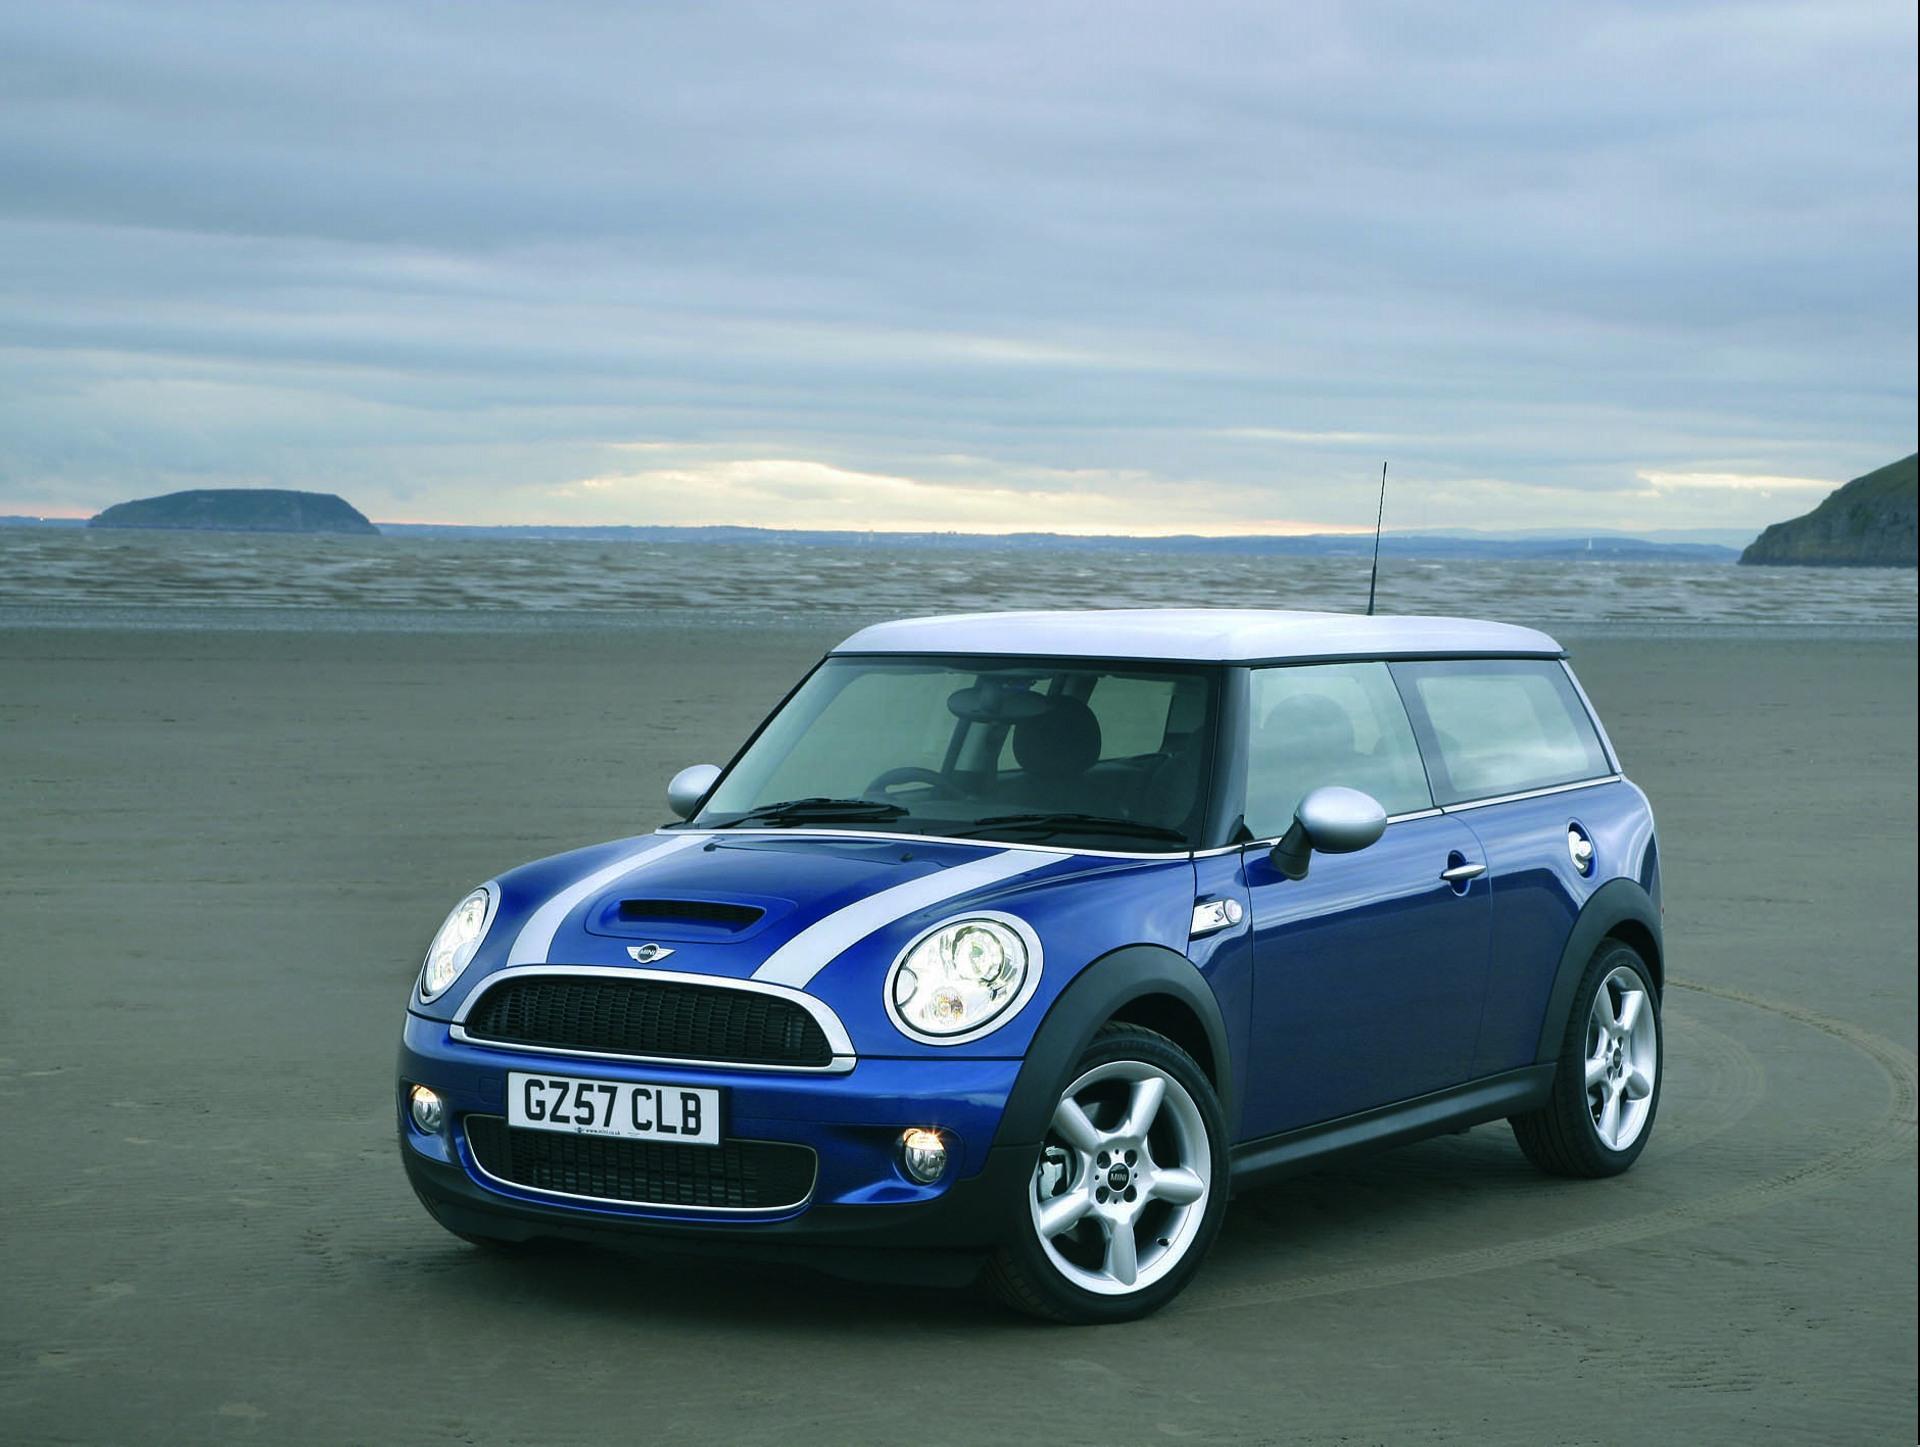 mini clubman related images,1 to 50 - Zuoda Images